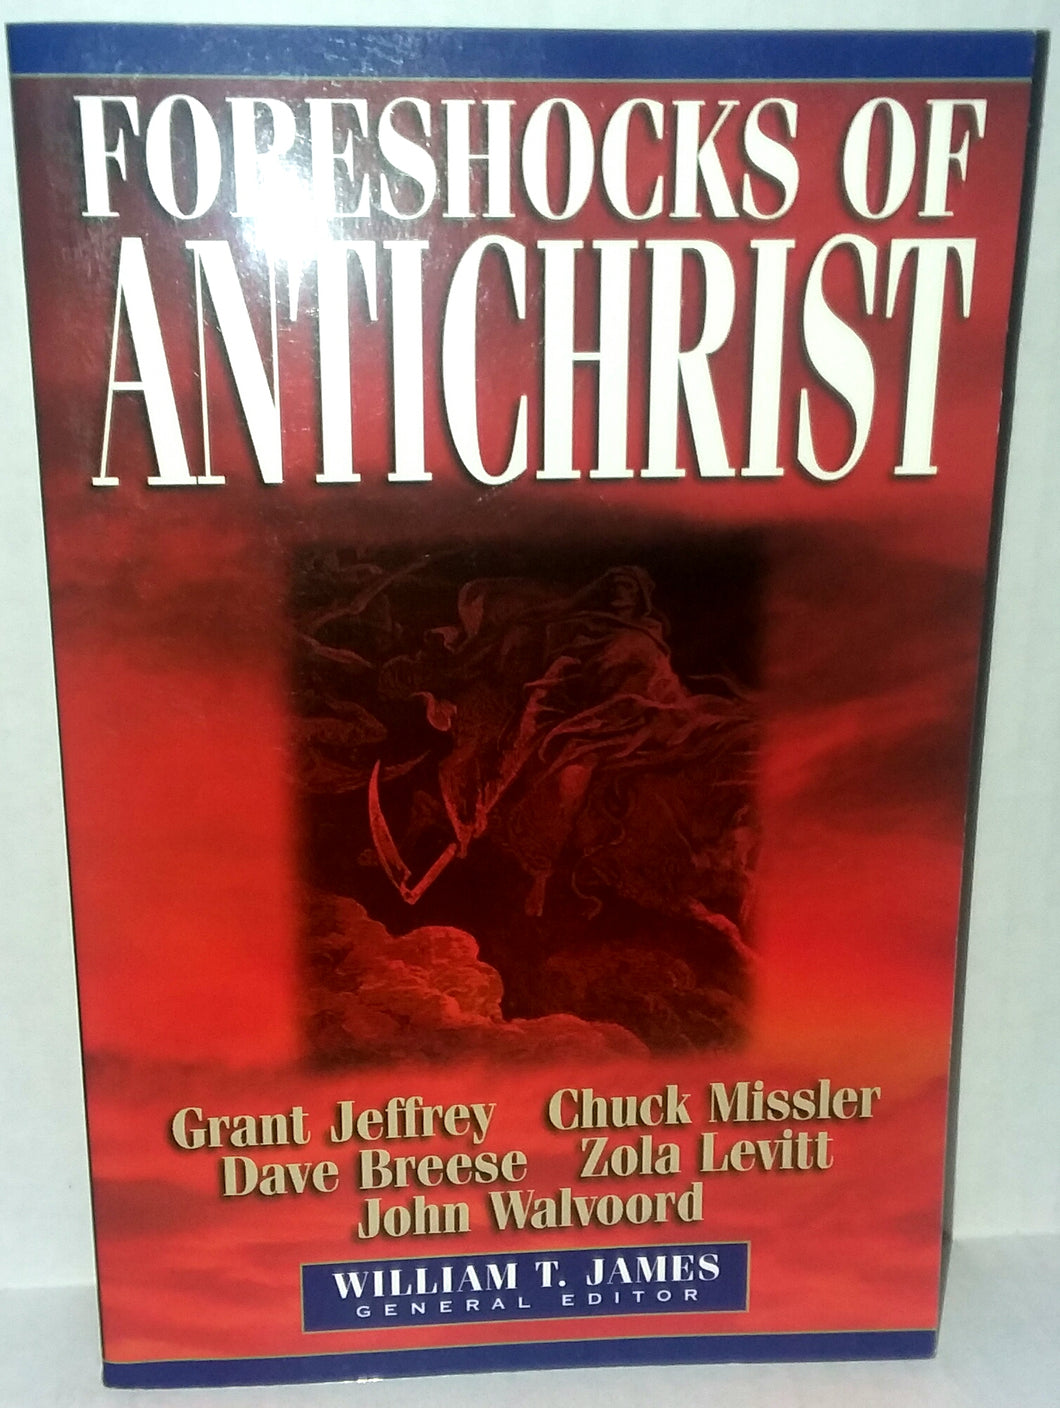 William T. James Foreshocks of Antichrist Vintage Paperback Book 1997 Various Authors Harvest House